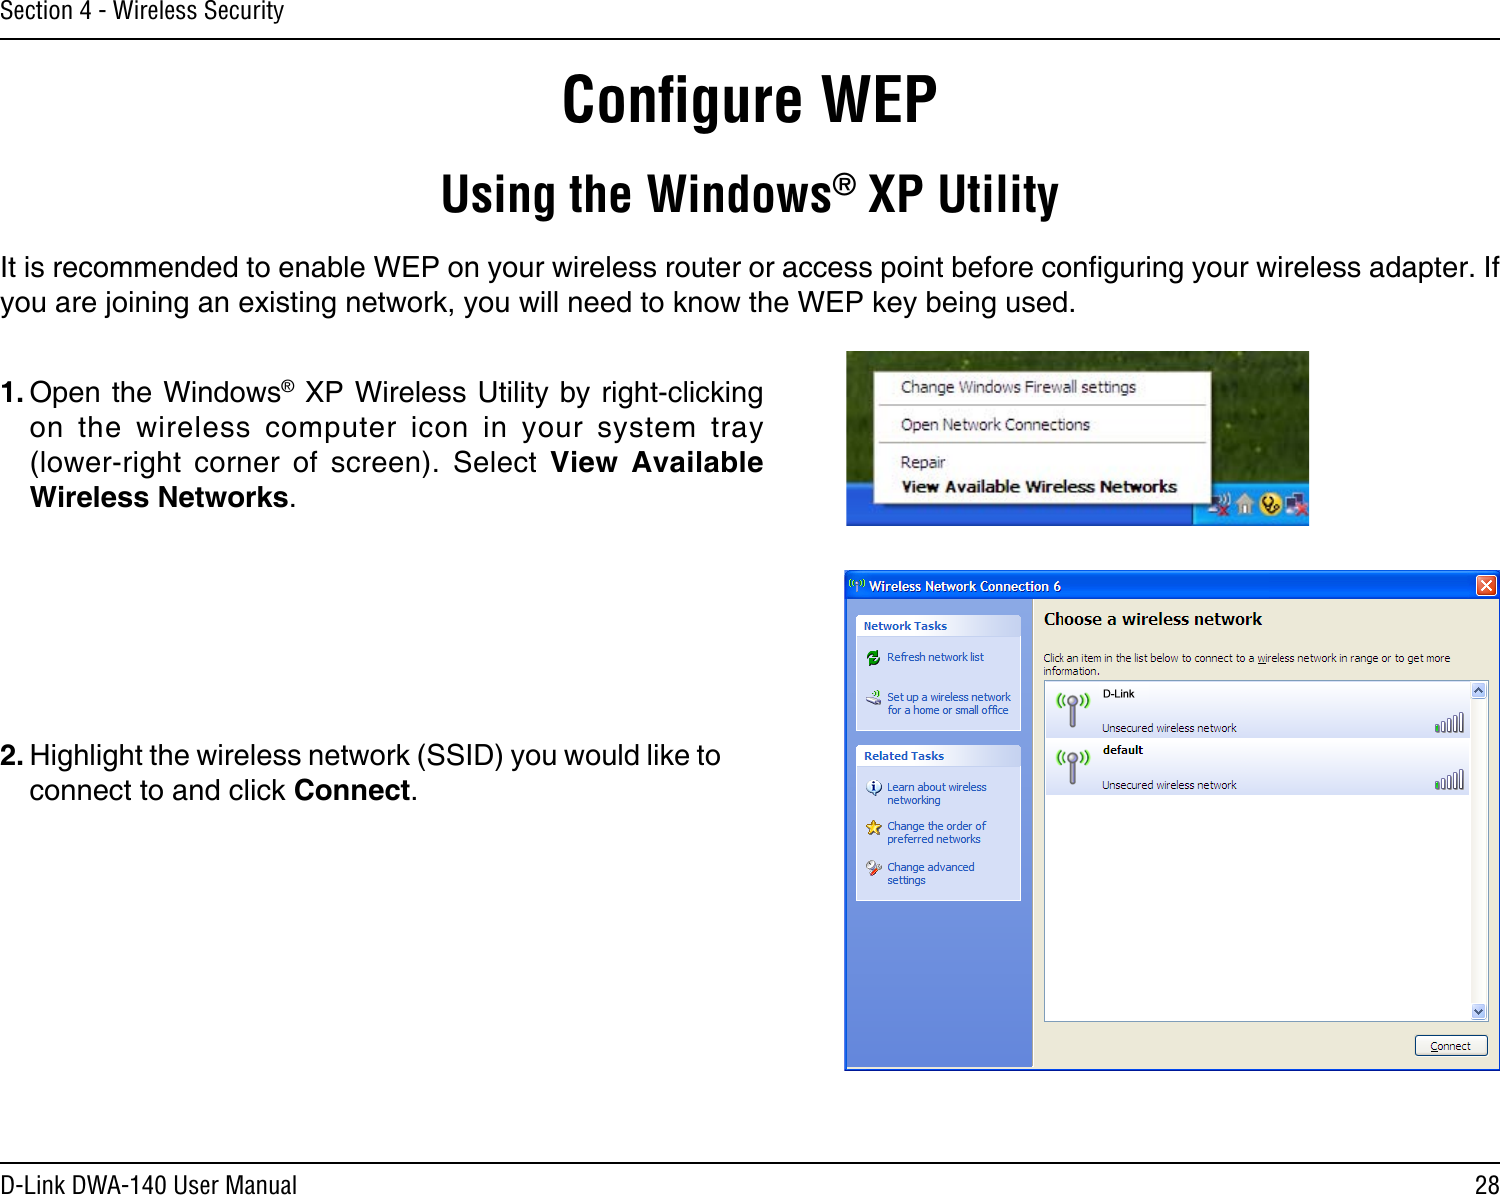 28D-Link DWA-140 User ManualSection 4 - Wireless SecurityConﬁgure WEPUsing the Windows® XP UtilityIt is recommended to enable WEP on your wireless router or access point before conguring your wireless adapter. If you are joining an existing network, you will need to know the WEP key being used.2. Highlight the wireless network (SSID) you would like to connect to and click Connect.1. Open the Windows® XP Wireless Utility by right-clicking on  the  wireless  computer  icon  in  your  system  tray  (lower-right  corner  of  screen).  Select  View  Available Wireless Networks. 